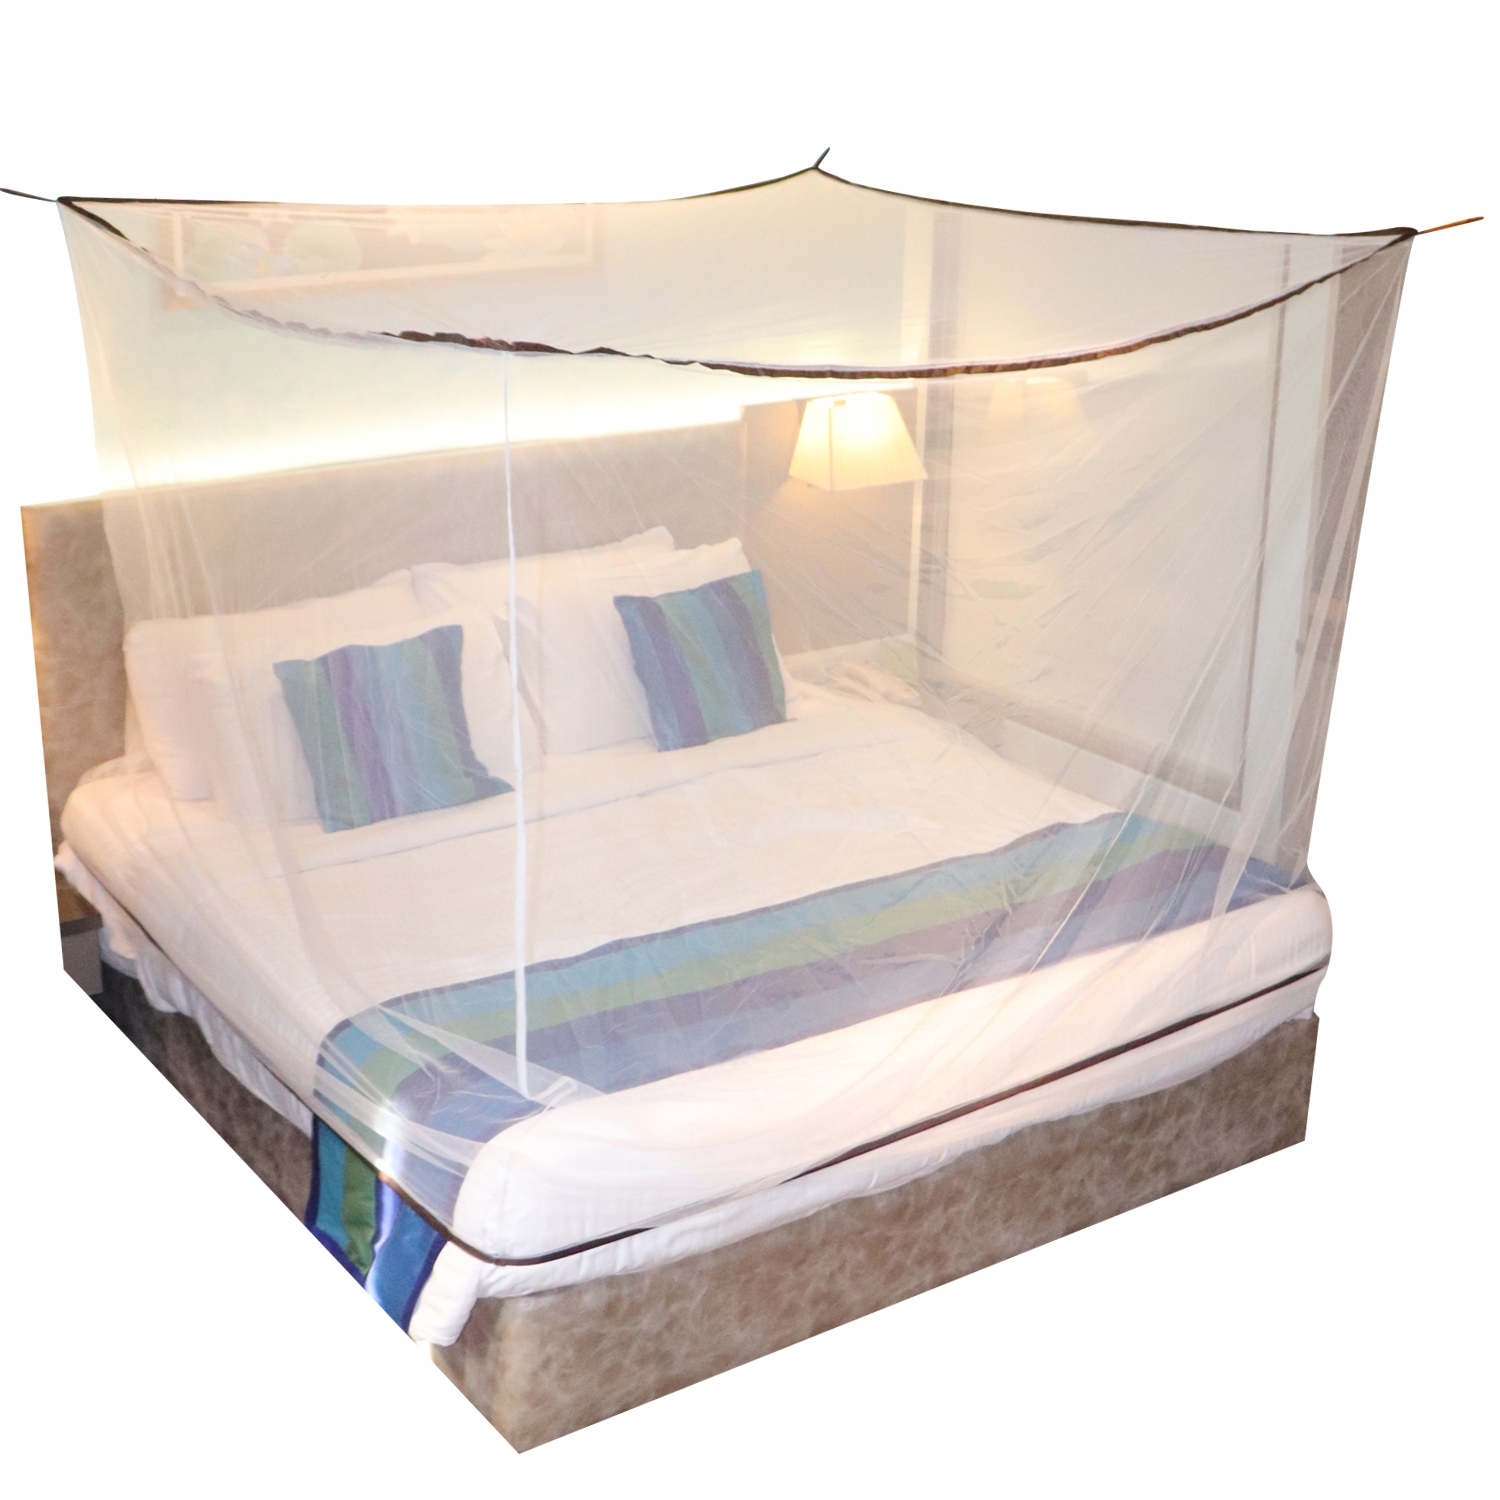 Mosquito Net for Double Bed, King-Size, Square Hanging Foldable Polyester Net White And Brown